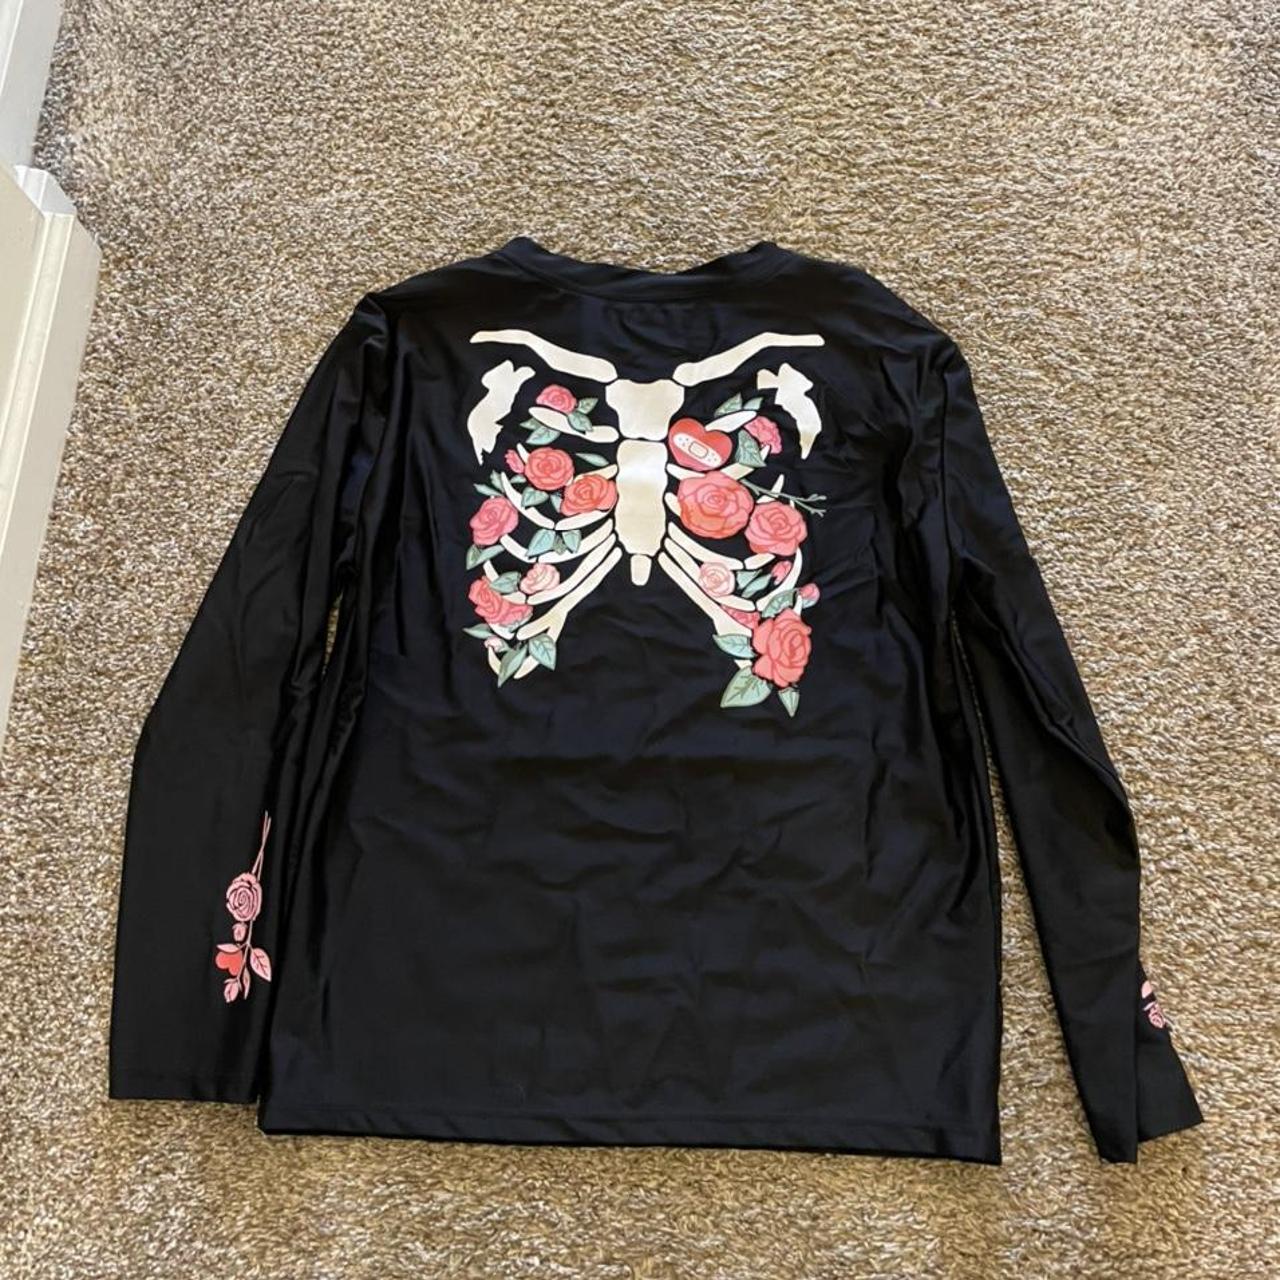 ribcage flower long sleeve top size small - Depop